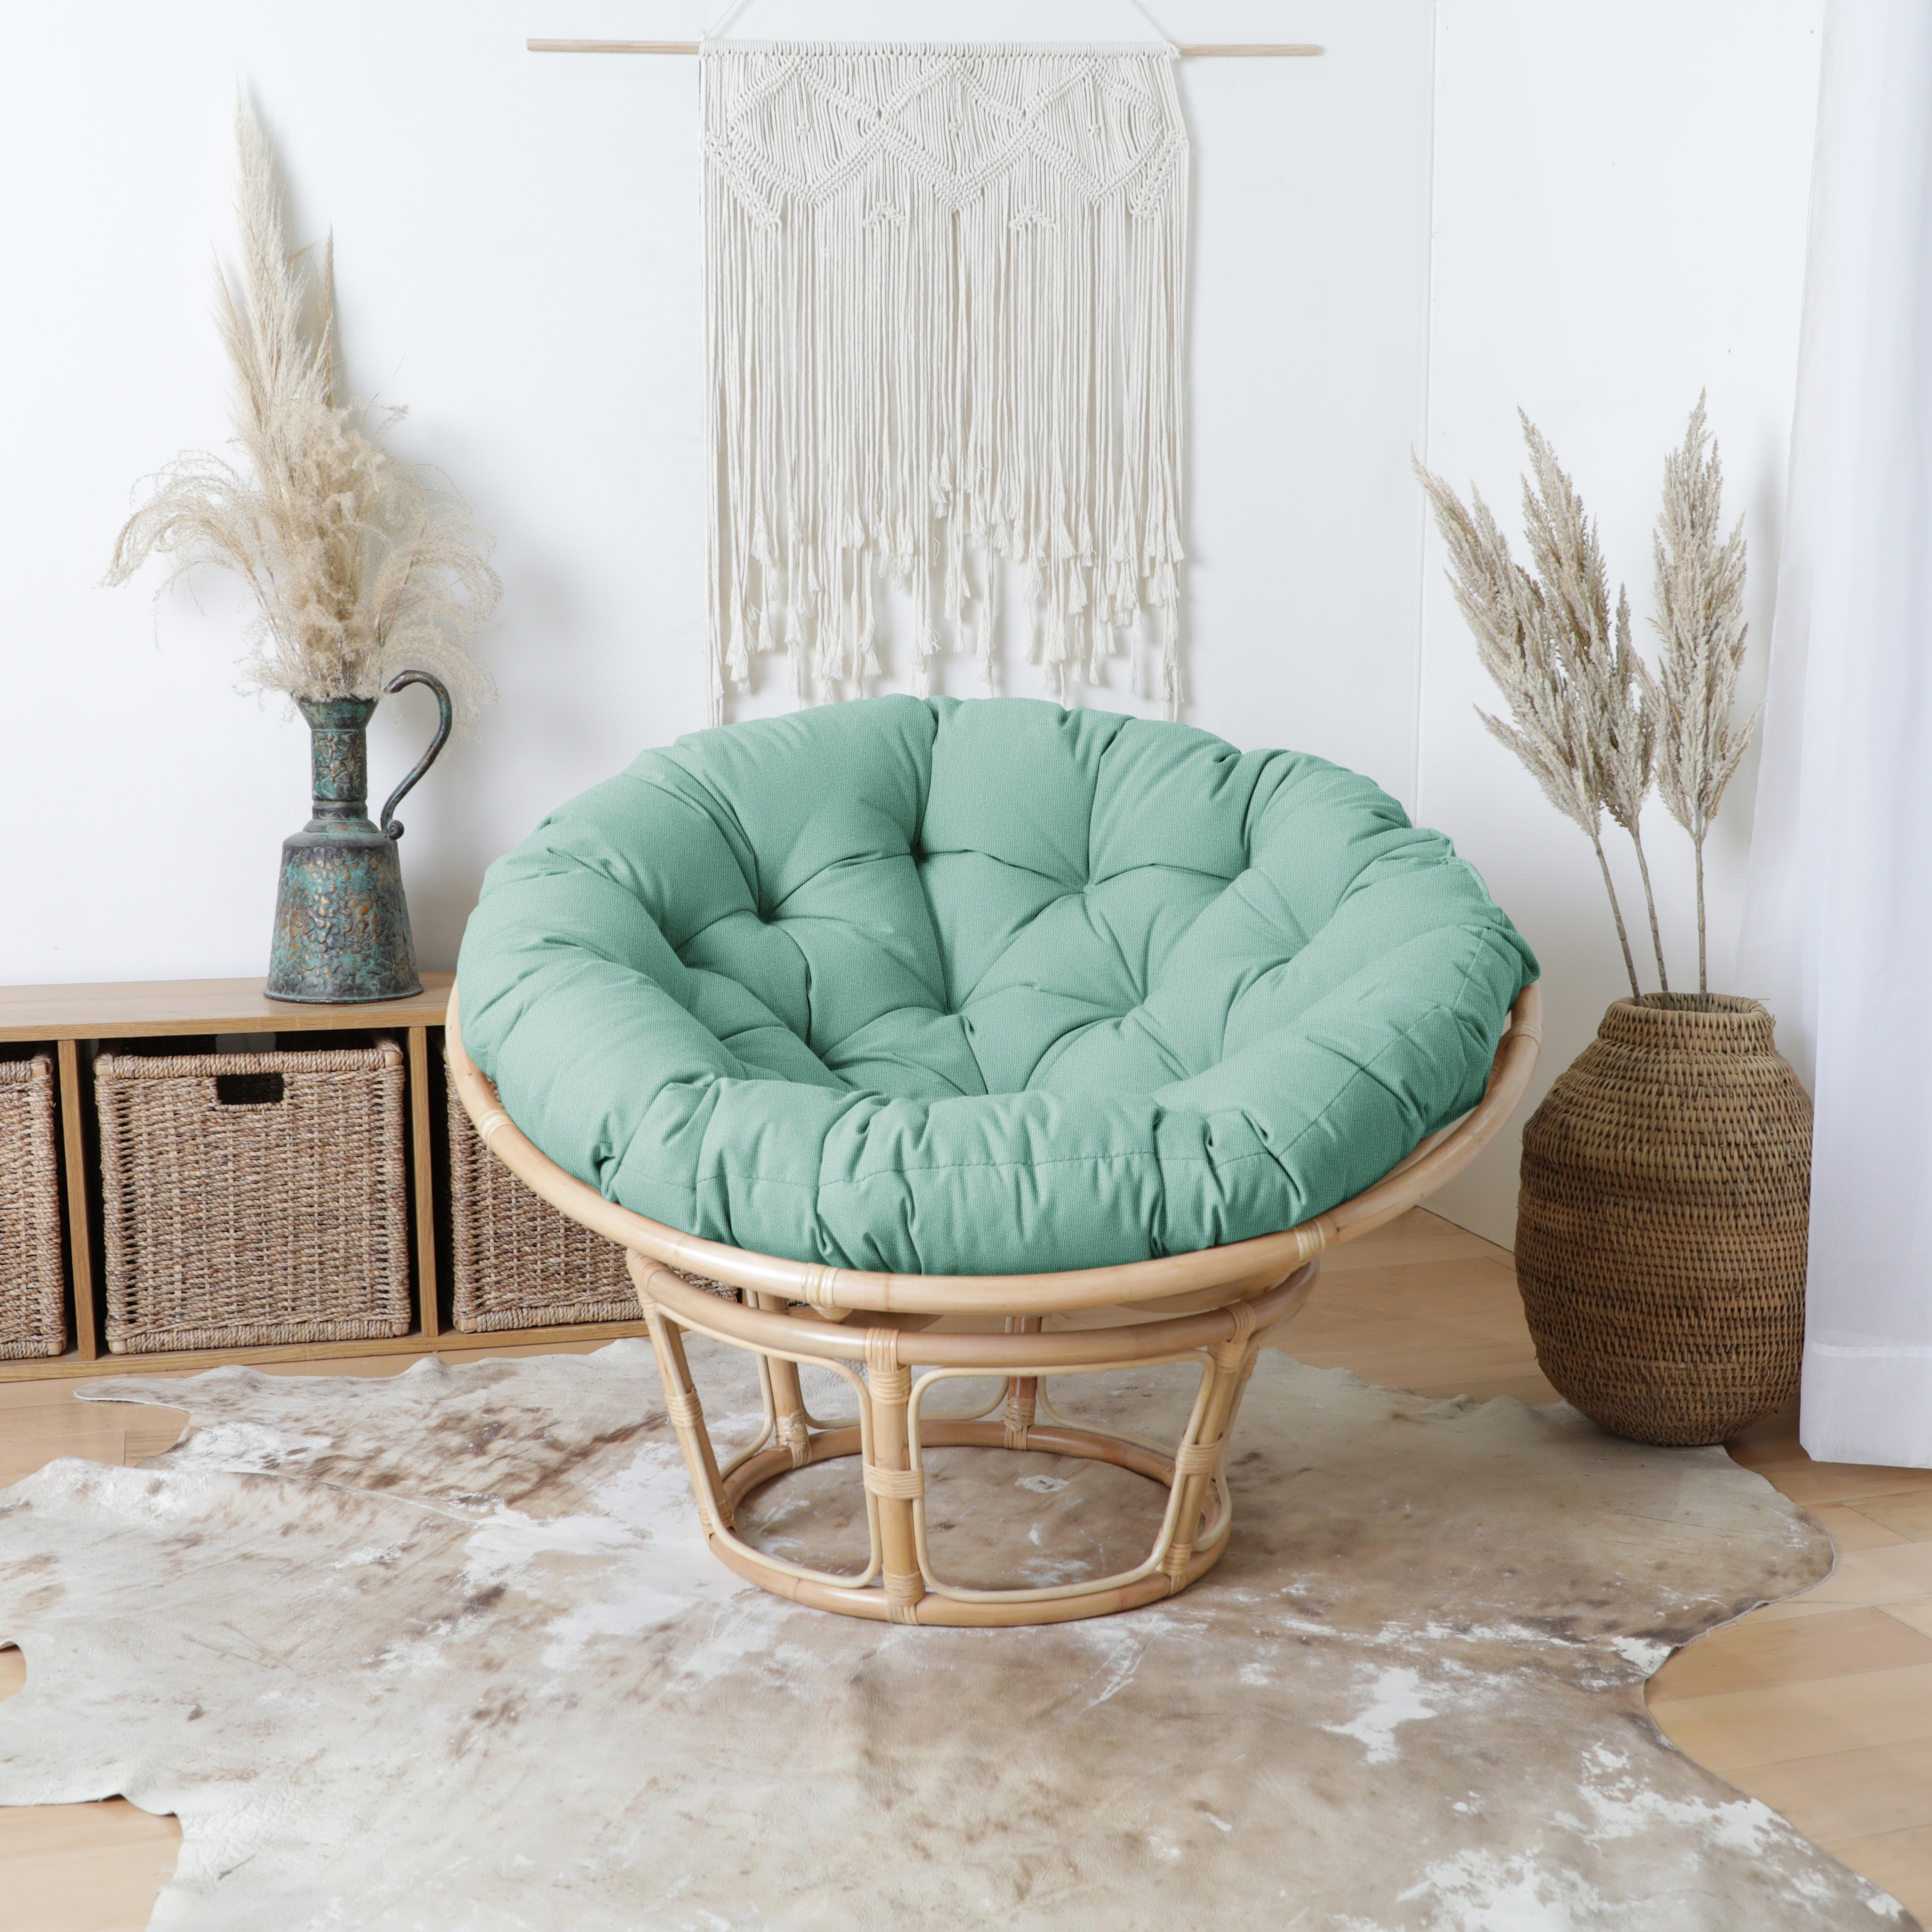 https://ak1.ostkcdn.com/images/products/is/images/direct/7f29cc4ceb1ccdf0f2803ee8f3c9a7749078fd41/Round-Papasan-Cushion.jpg